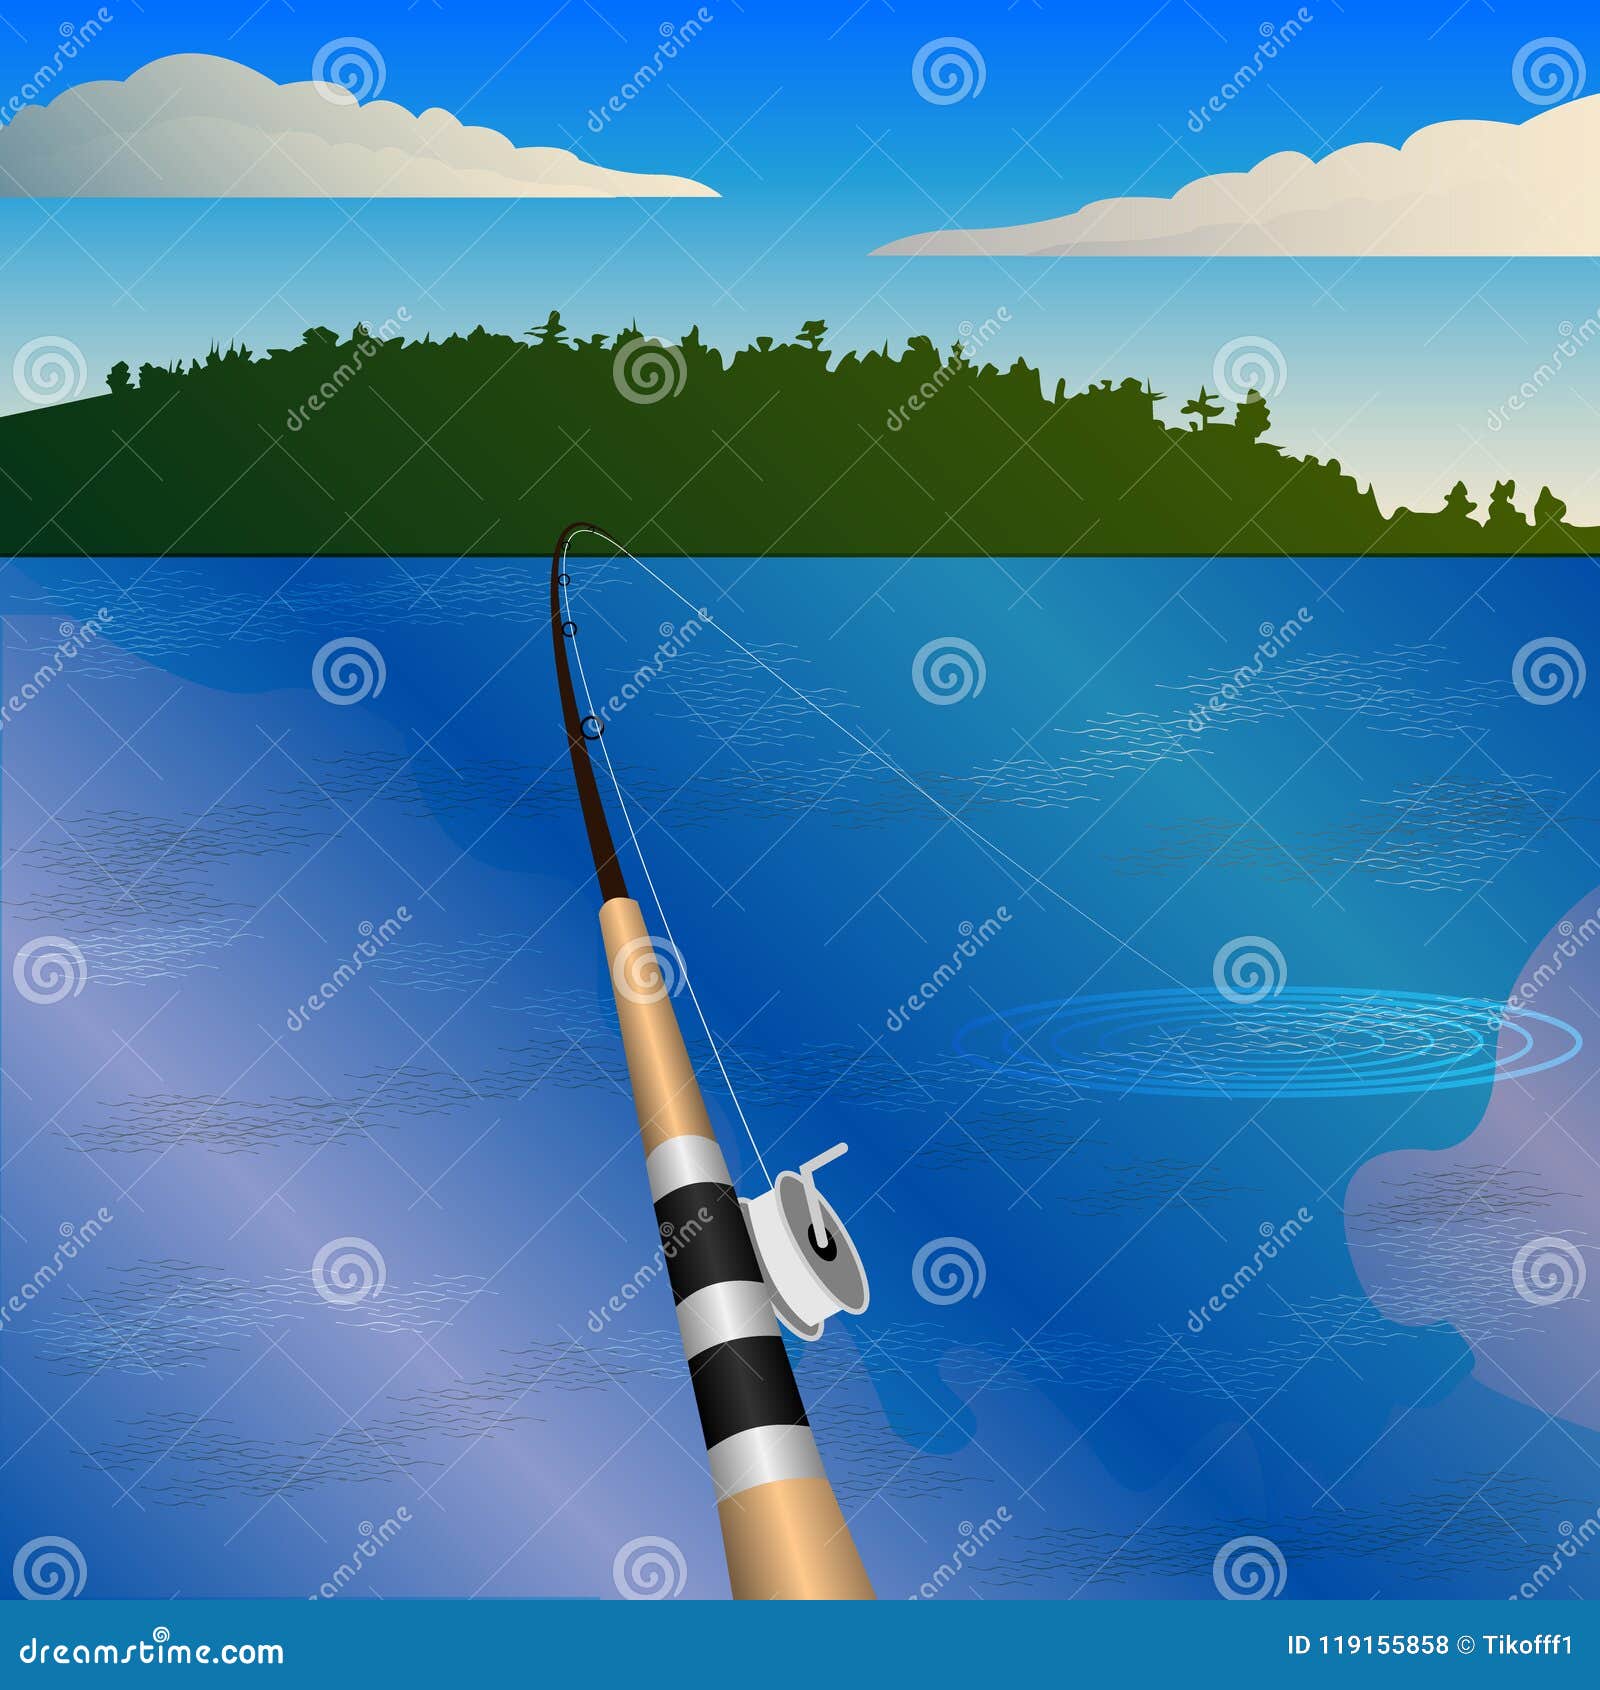 https://thumbs.dreamstime.com/z/fishing-rod-reel-bite-fishing-first-person-view-pond-forest-horizon-fishing-rod-reel-bite-fishing-first-119155858.jpg